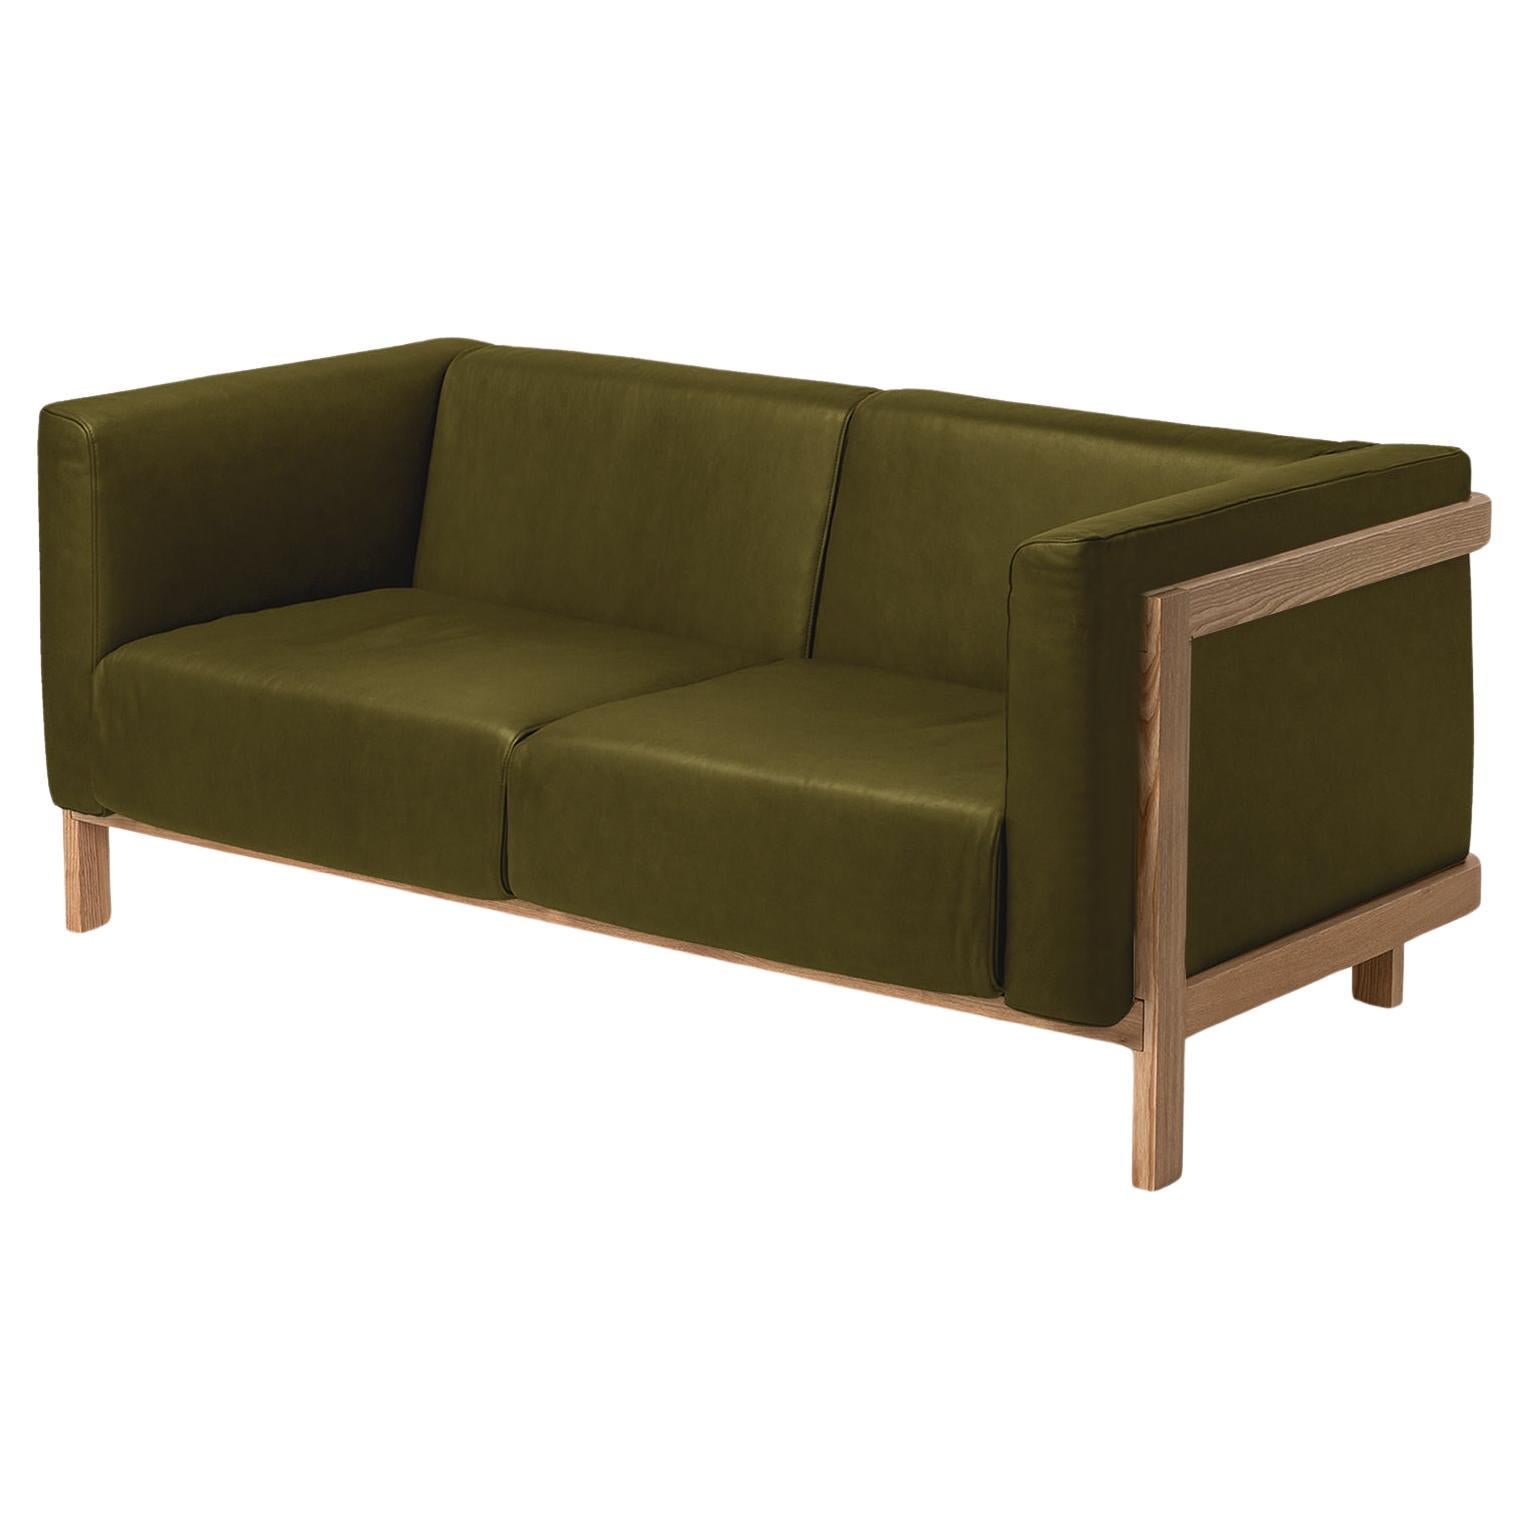 Minimalist two seater sofa ash - leather upholstered